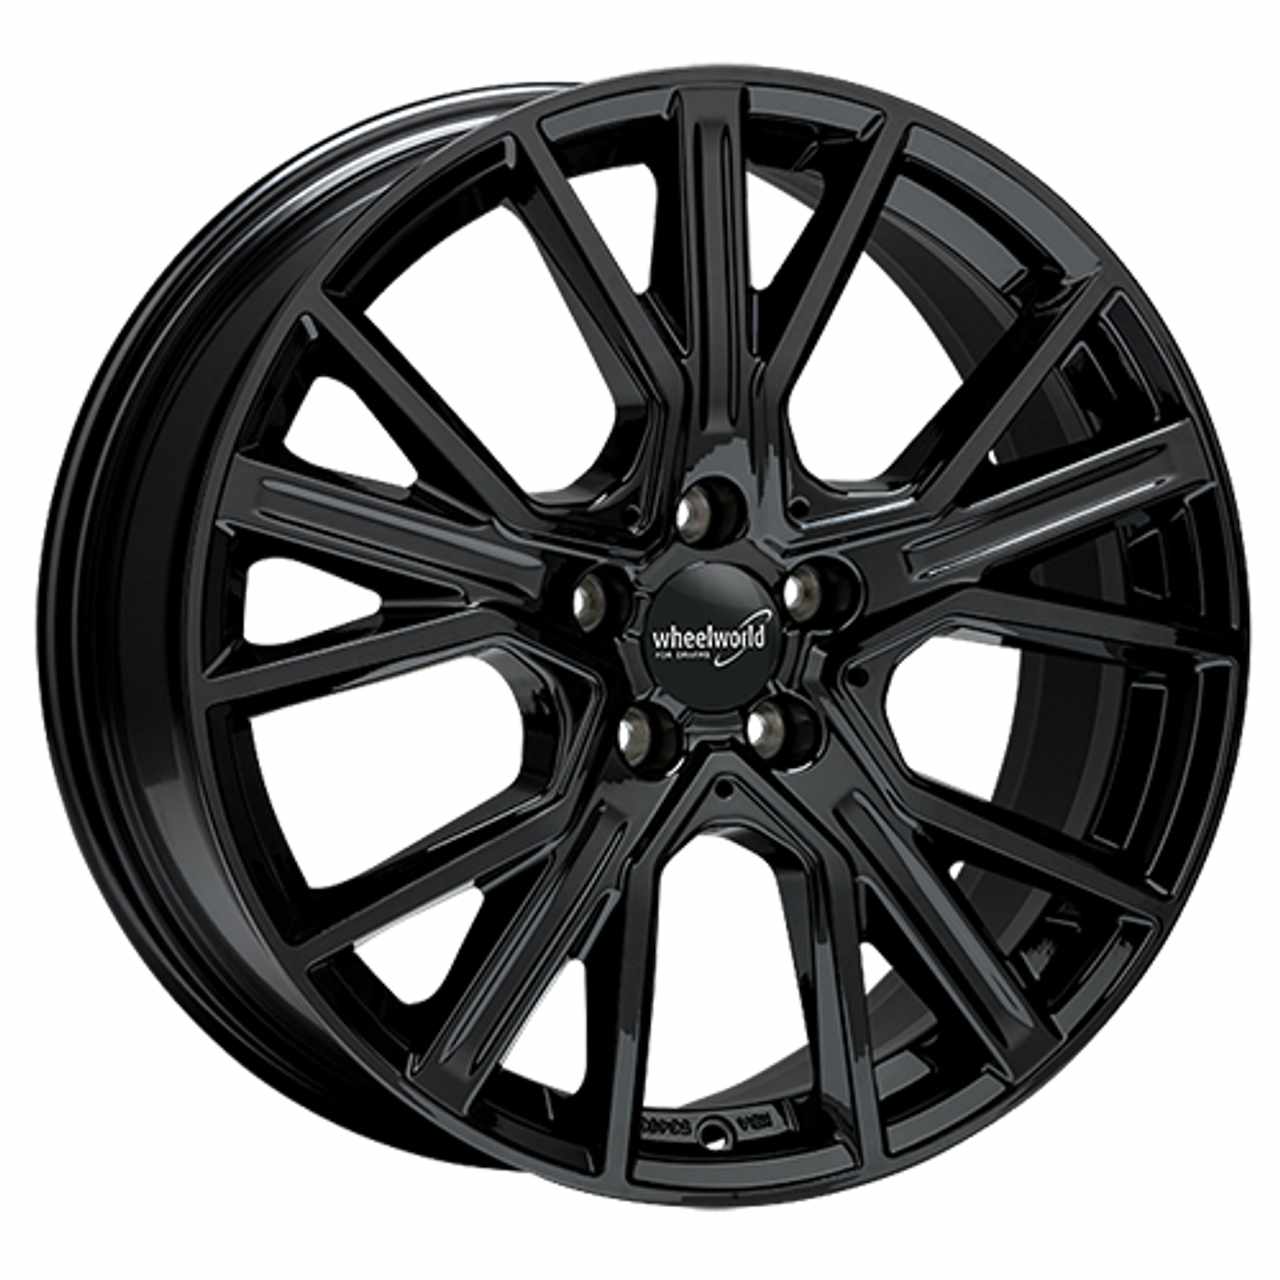 WHEELWORLD-2DRV WH34 black glossy painted 8.5Jx19 5x112 ET45